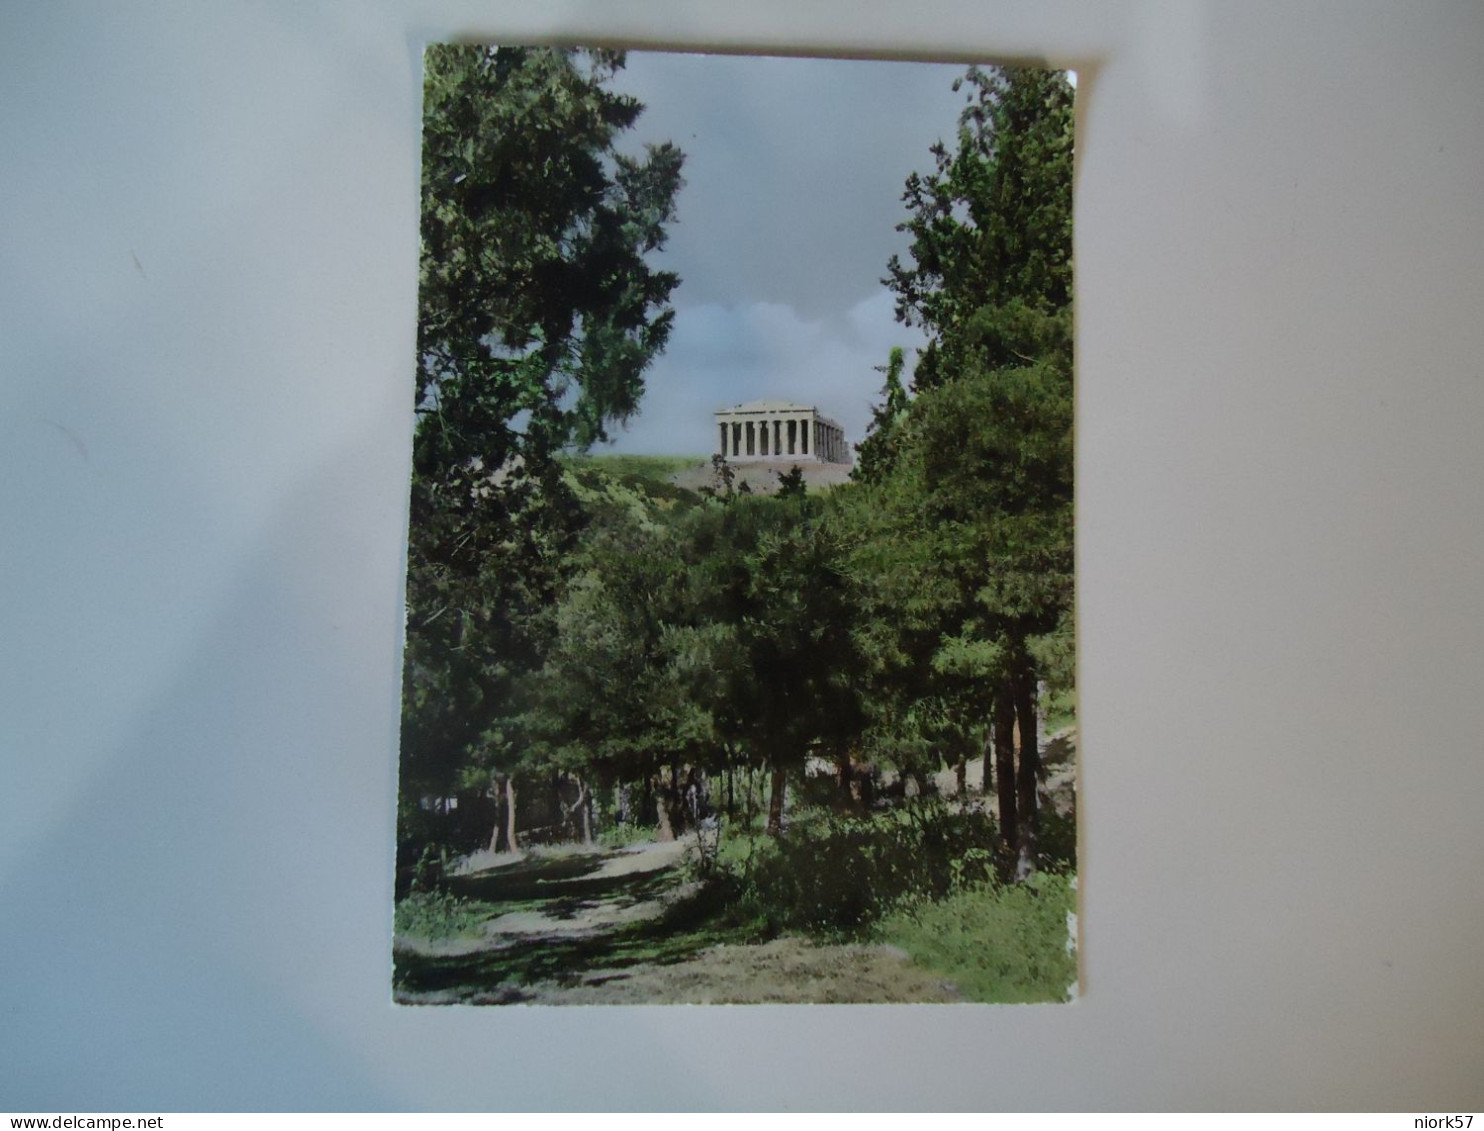 GREECE POSTCARDS ATHENS  1958 ΑΠΟΨΙΣ  ΠΑΡΘΕΝΩΝΟΣ  WITH STAMPS - Grecia